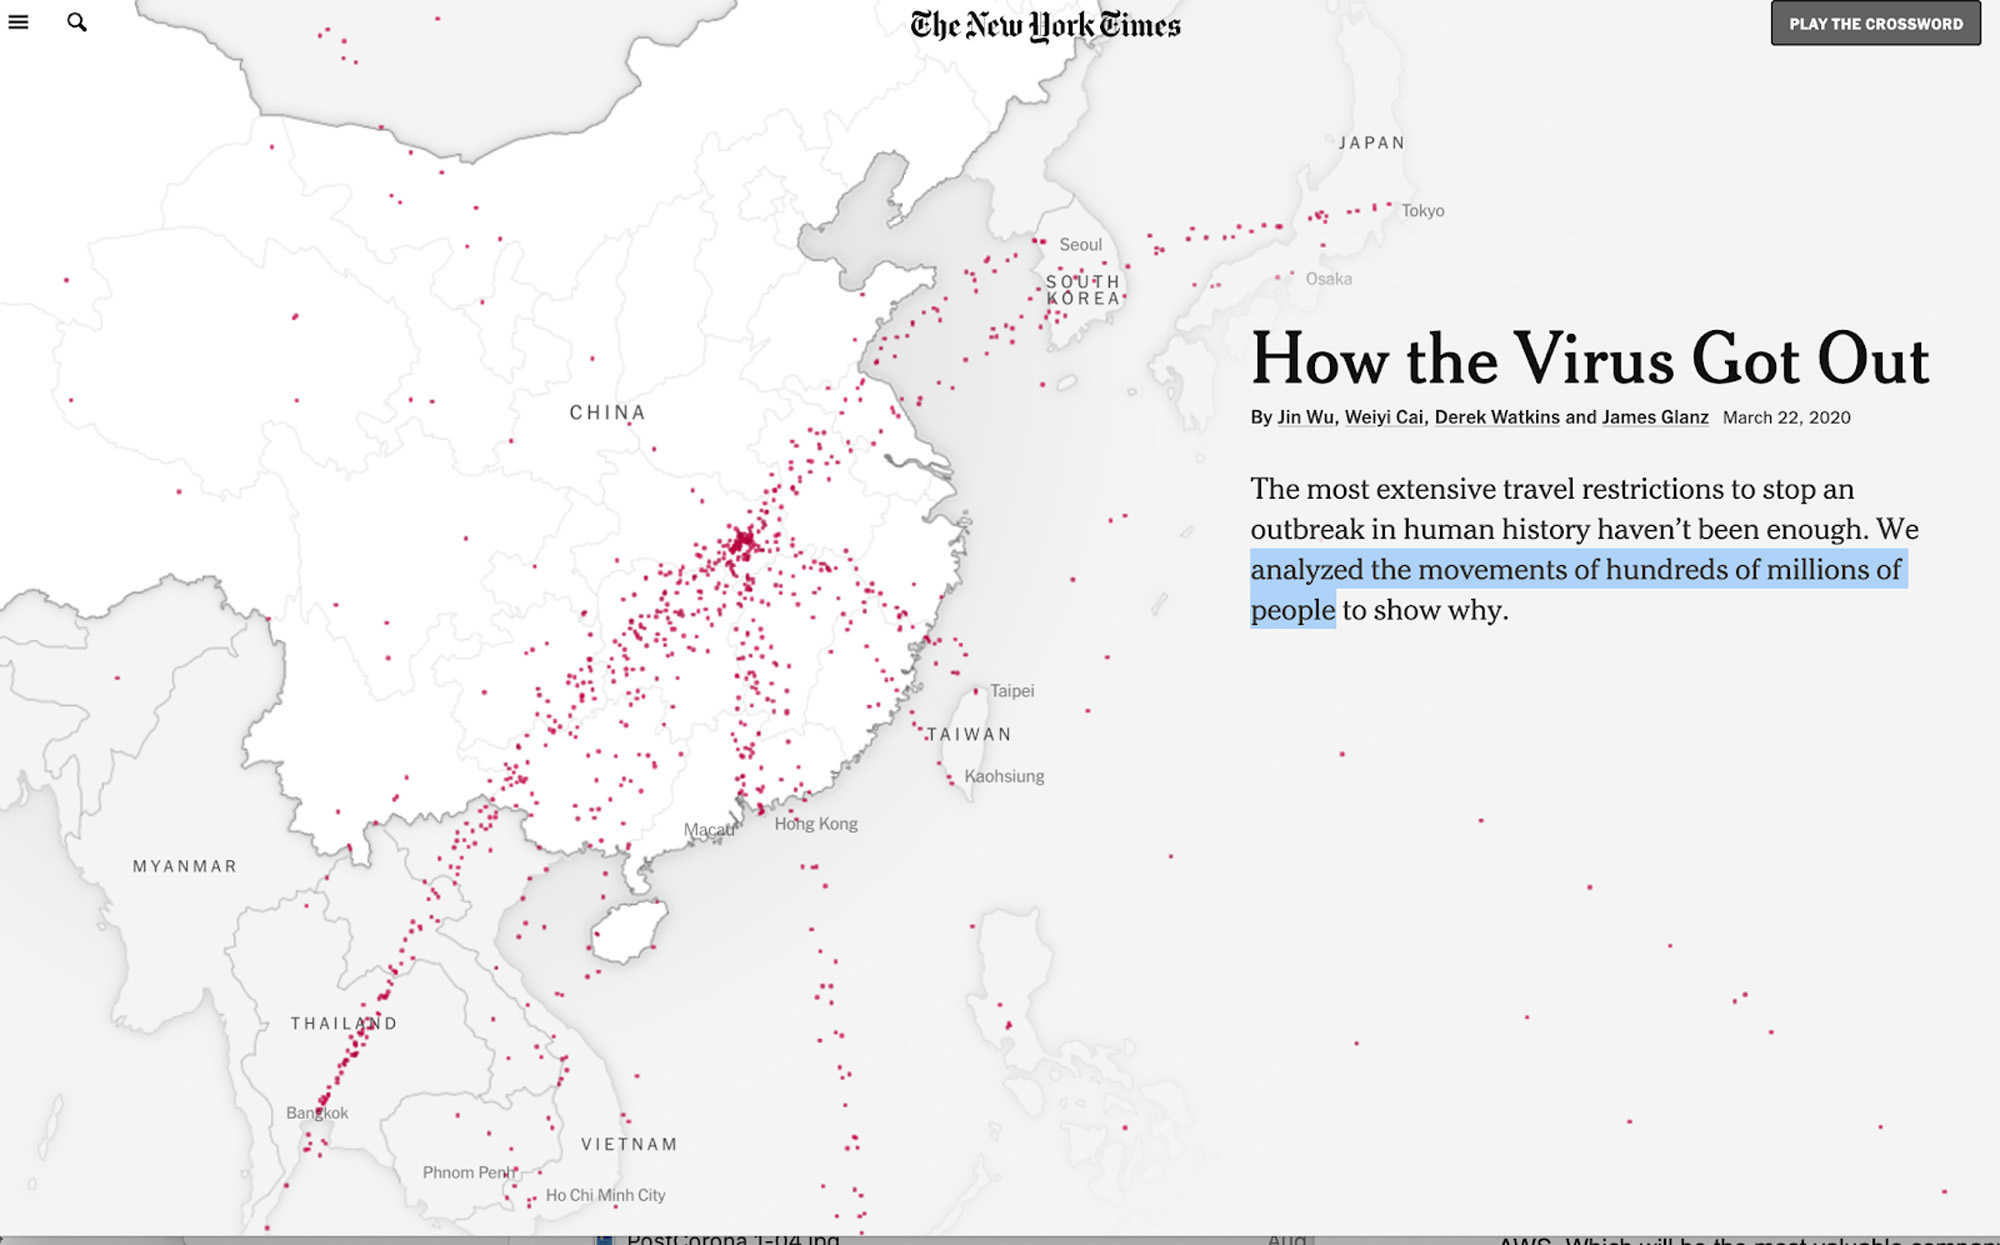 Still image of the interactive graphic from The New York Times article, "How the Virus Got Out"--showing movement of people